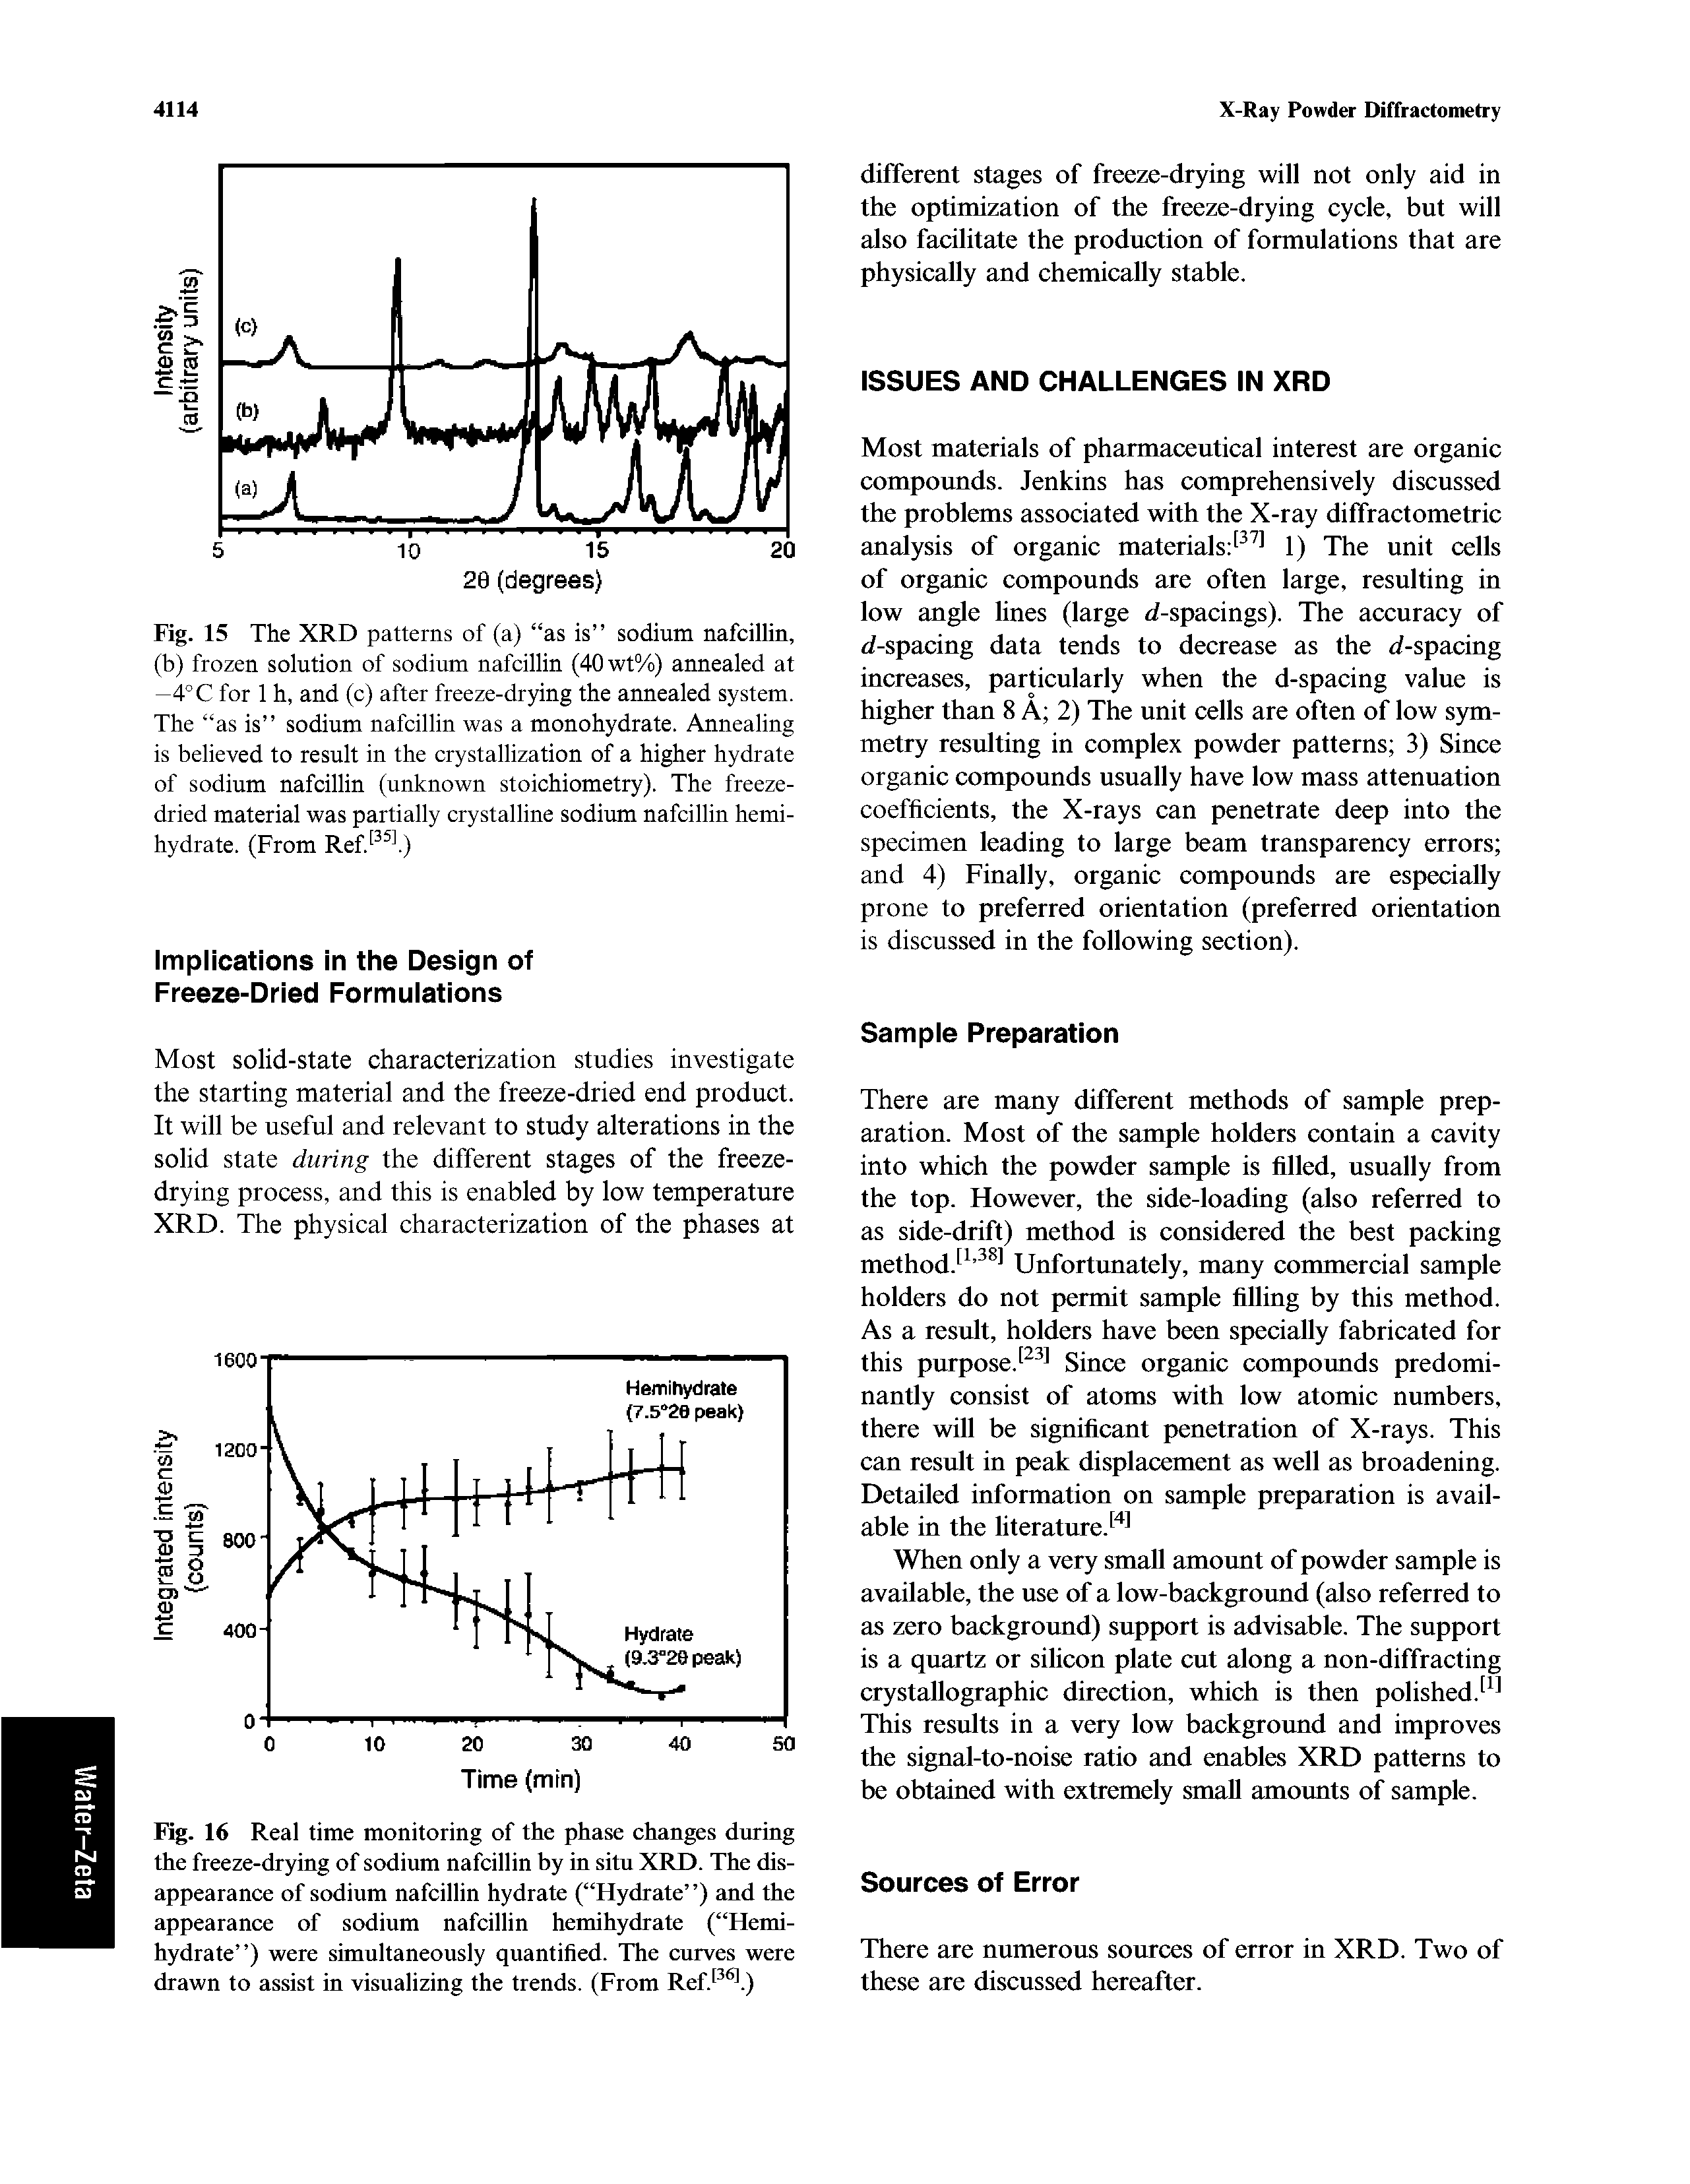 Fig. 16 Real time monitoring of the phase changes during the freeze-drying of sodium nafcillin by in situ XRD. The disappearance of sodium nafcillin hydrate ( Hydrate ) and the appearance of sodium nafcillin hemihydrate ( Hemi-hydrate ) were simultaneously quantified. The curves were drawn to assist in visualizing the trends. (From Ref. . )...